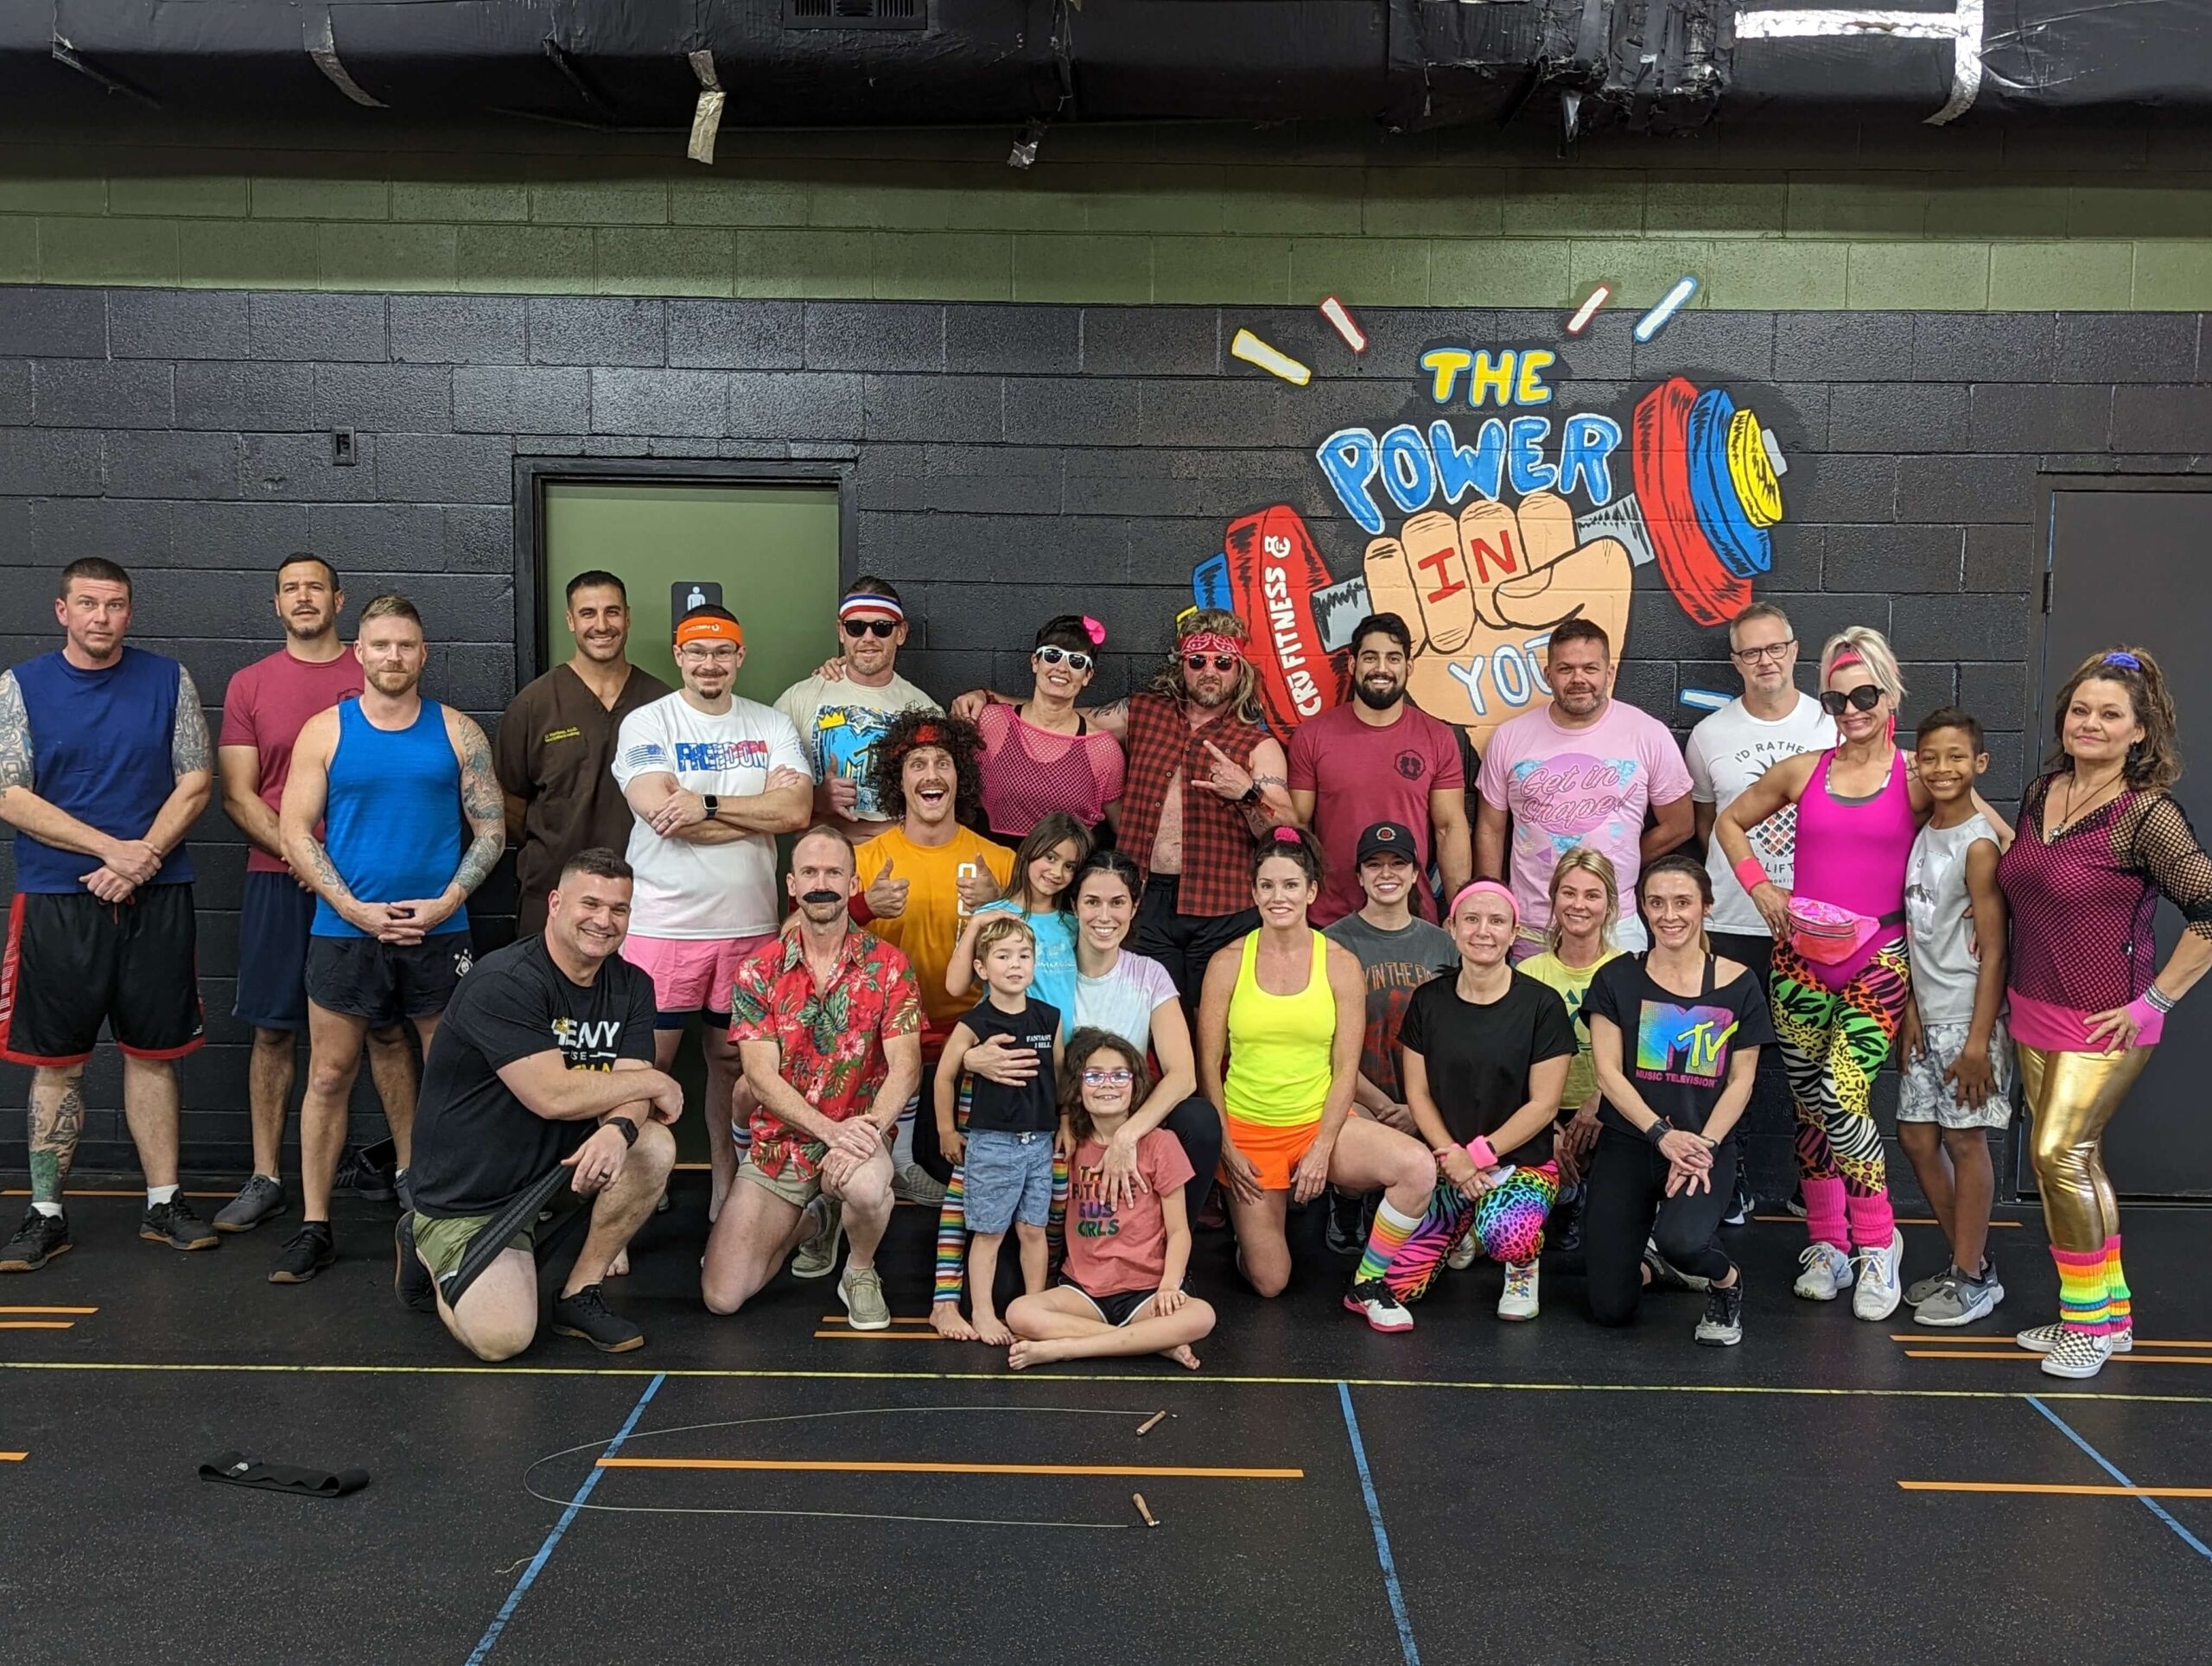 Members and coaches of Cru Fitness pose together in front of mural on the wall at the gym after completing their 80's themed open crossfit workout together